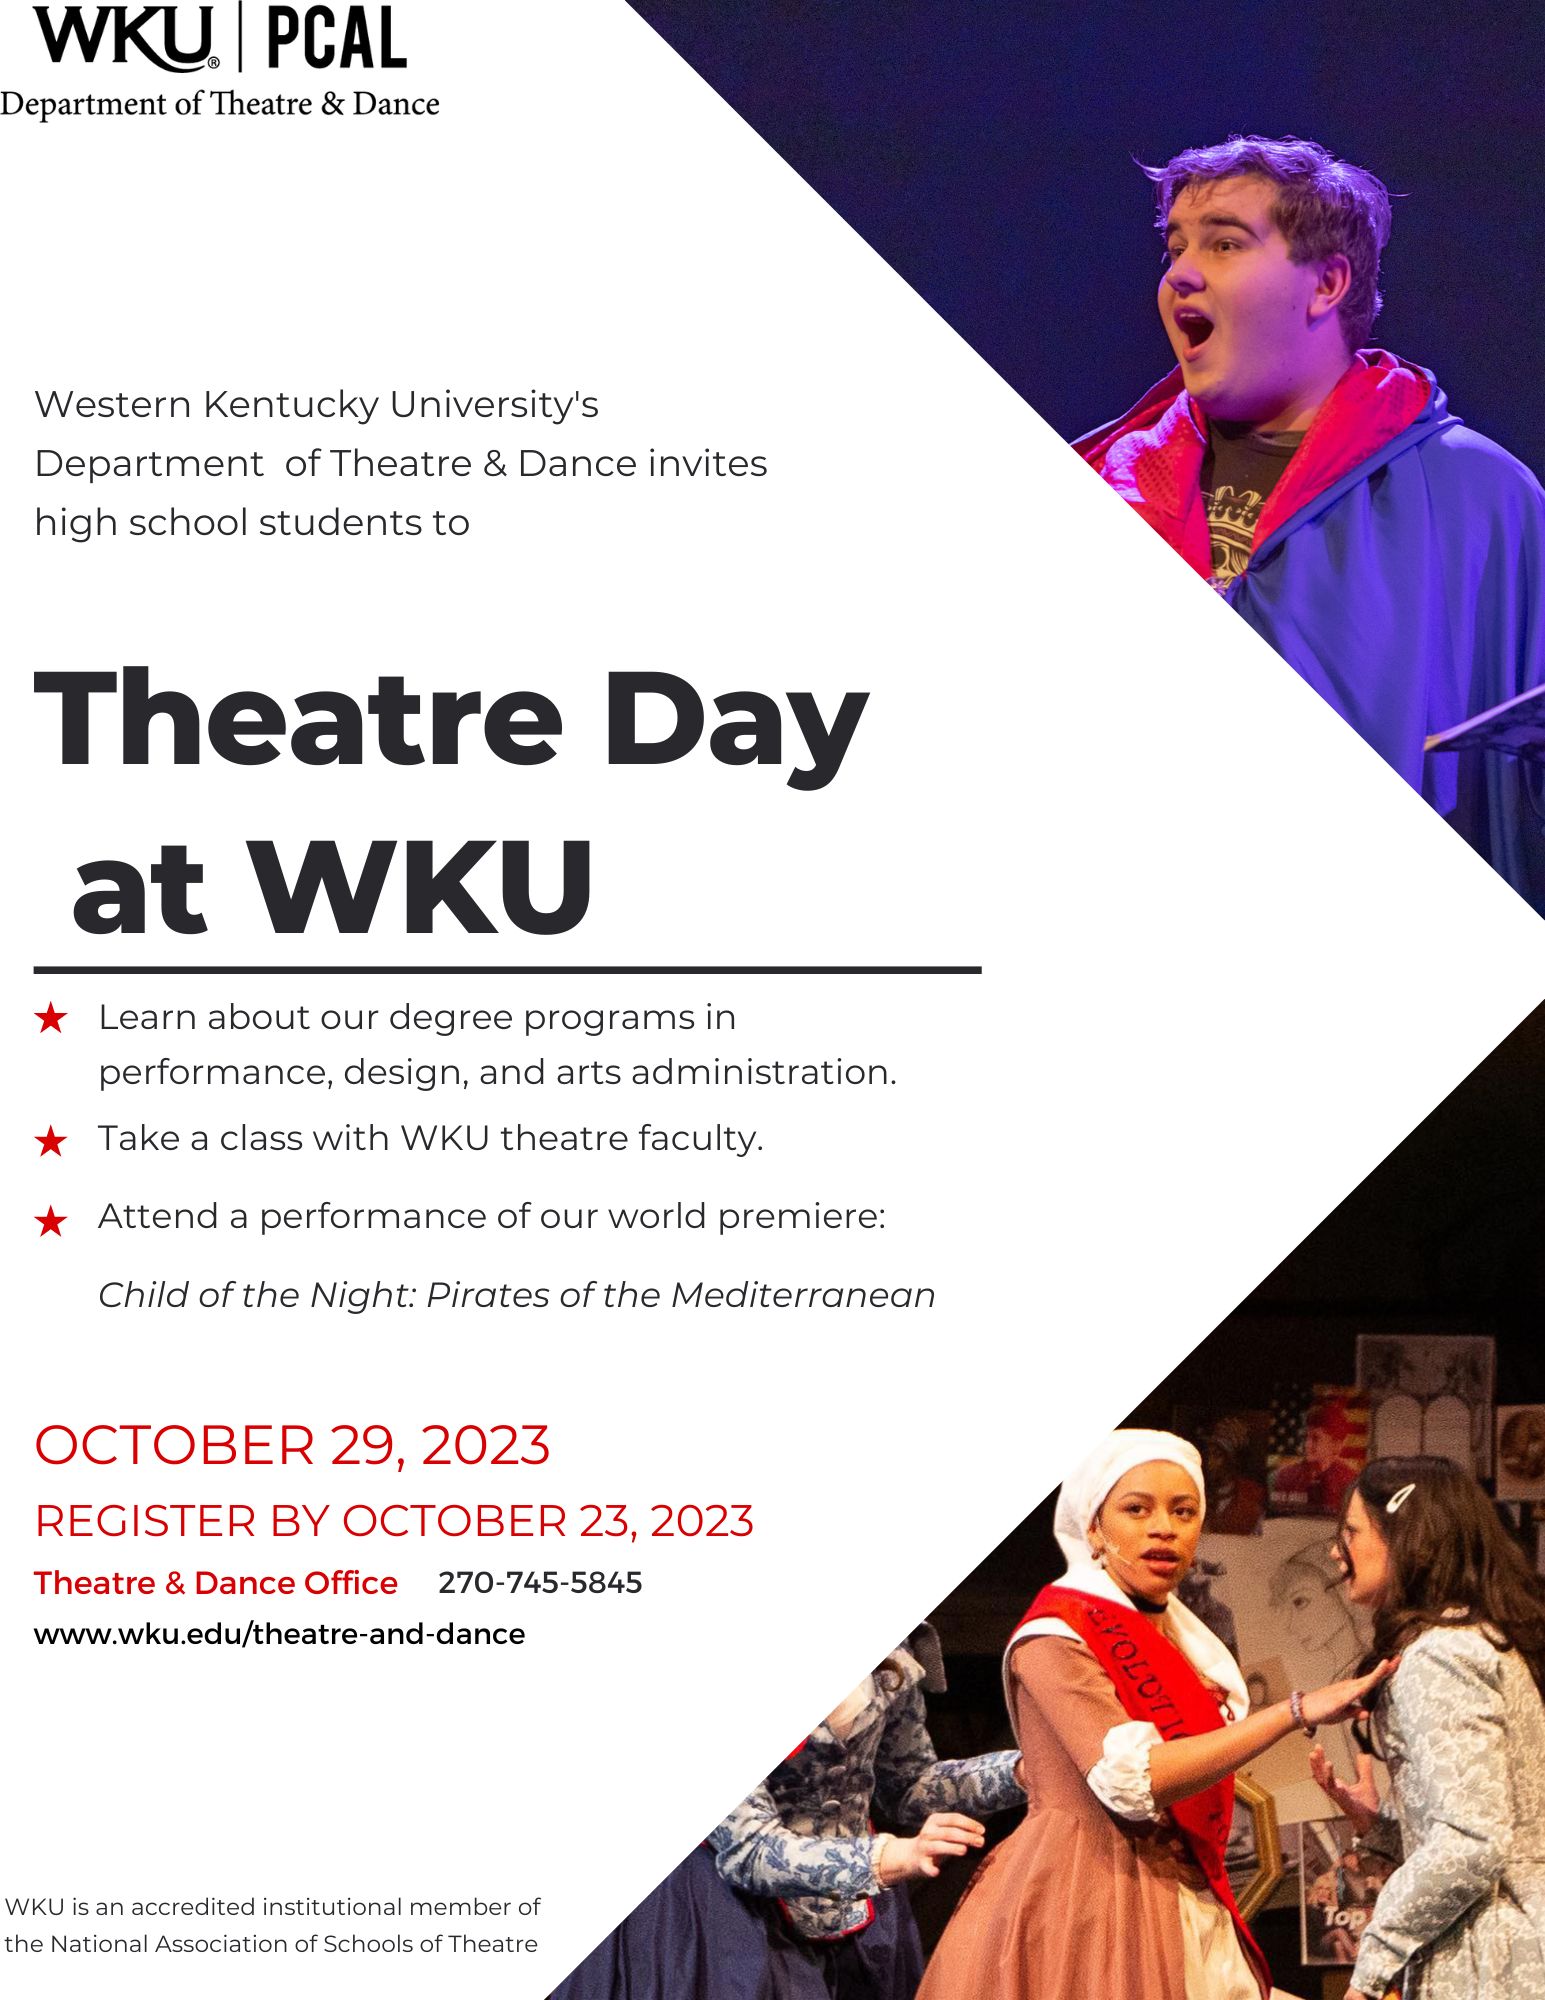 Pictures of performers from different WKU mainstage theatrical productions surround details for 2023's Theatre Day.